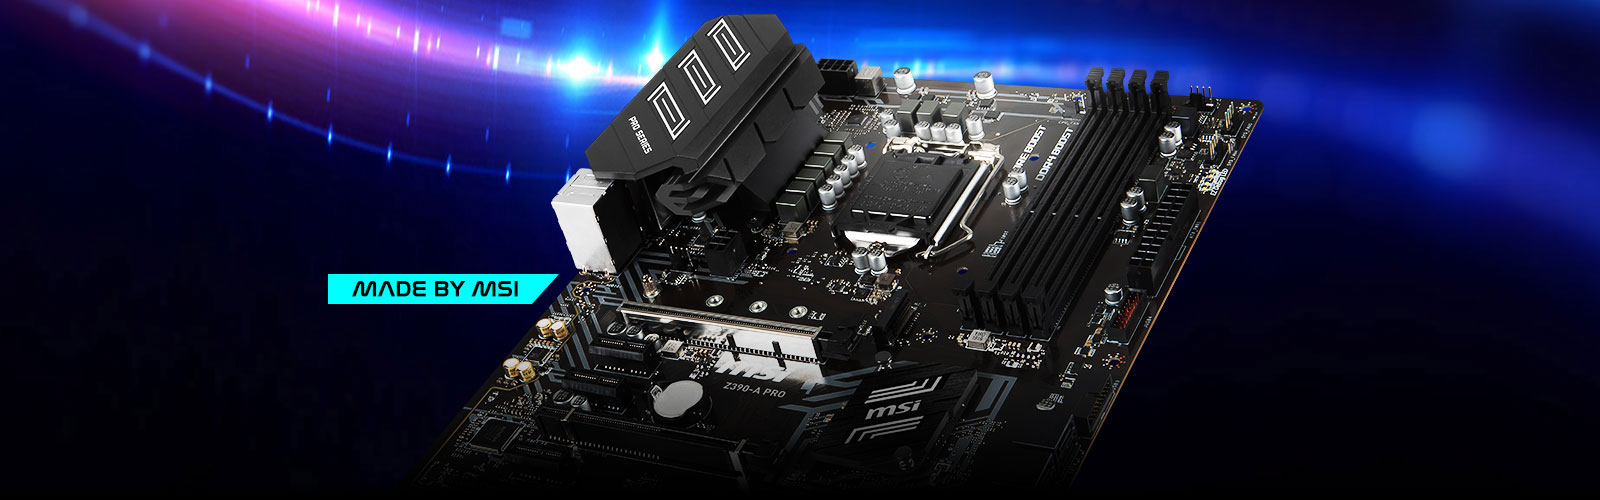 Motherboard made by MSI.